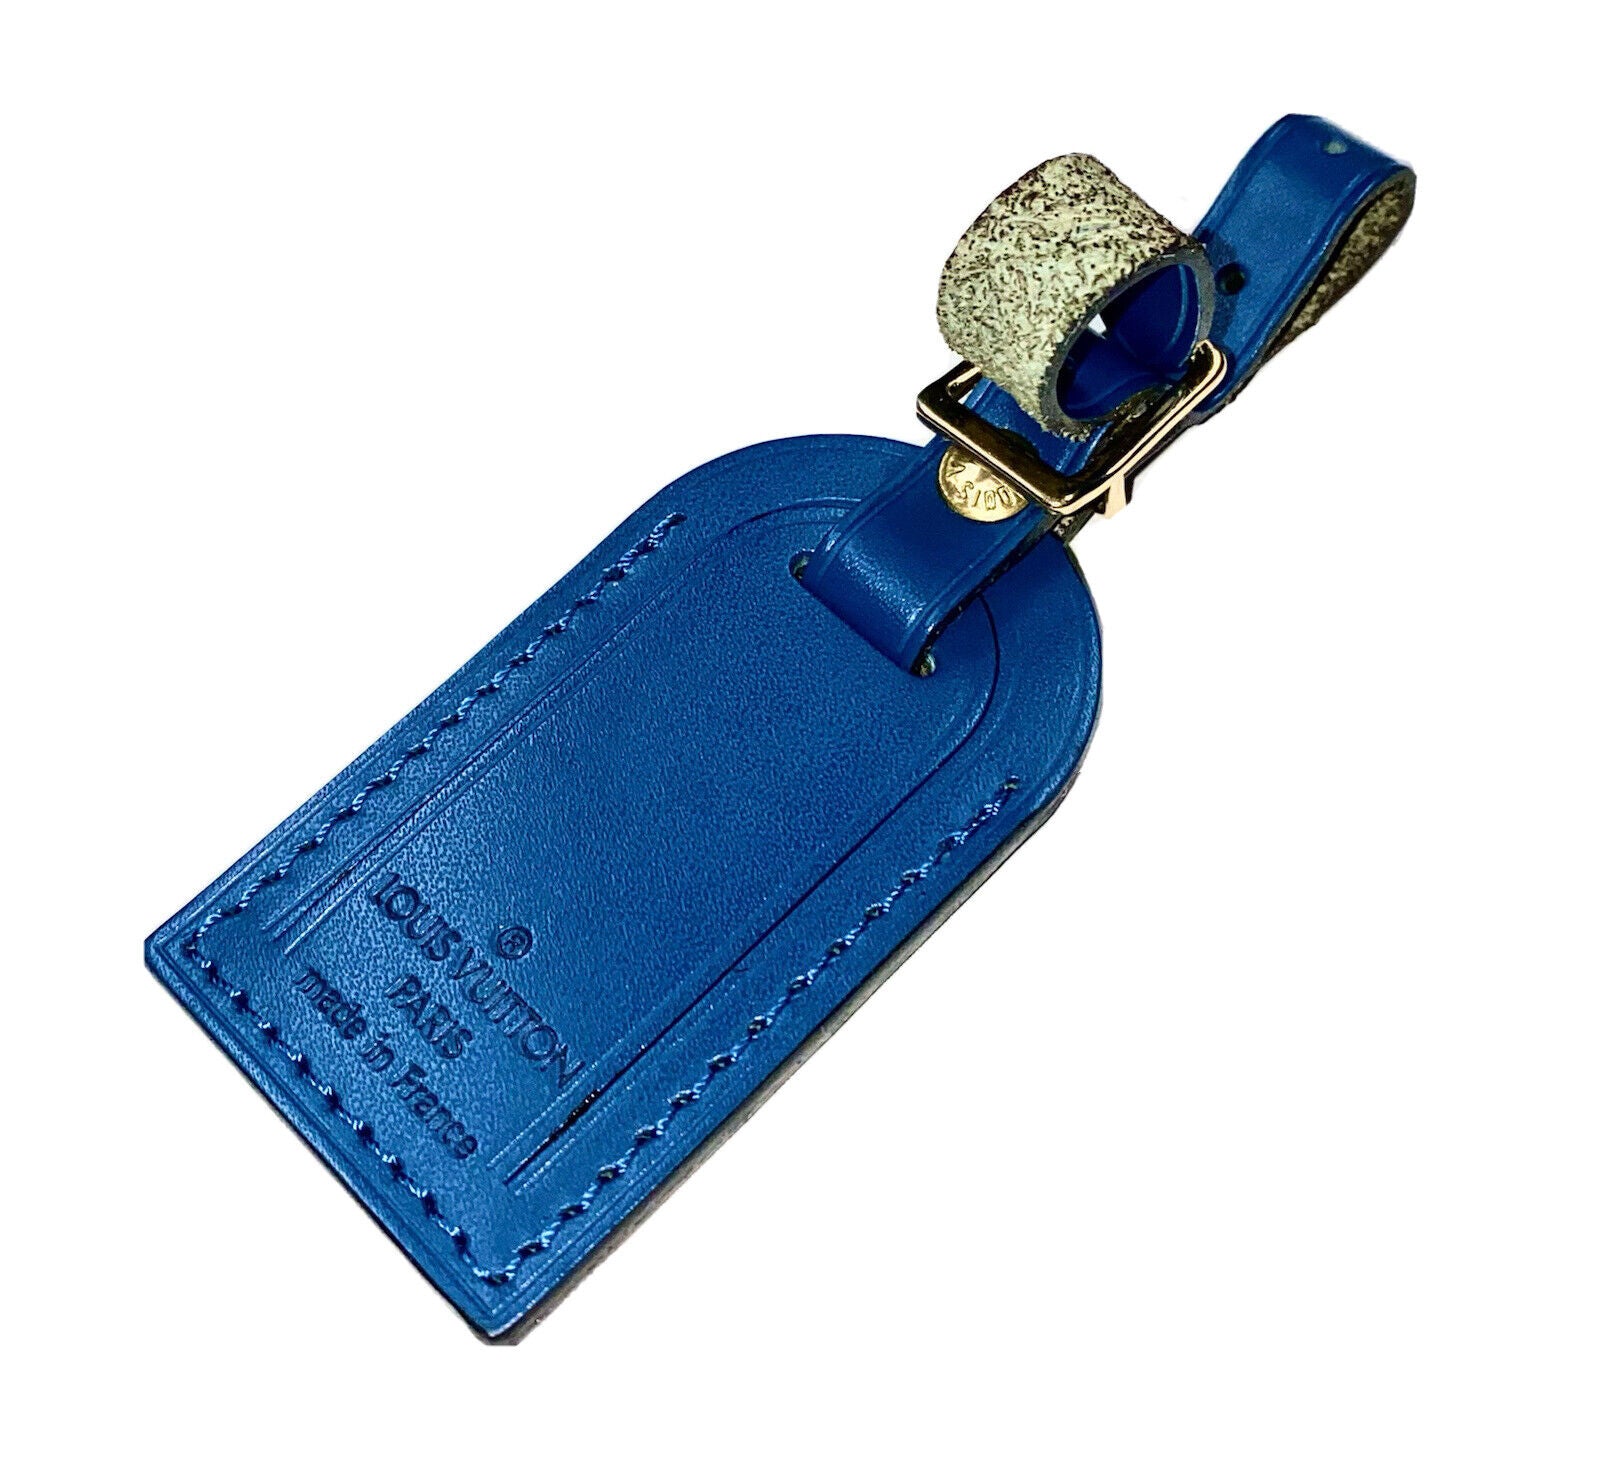 Louis Vuitton Luggage Tag Toledo Blue Small Calfskin Leather